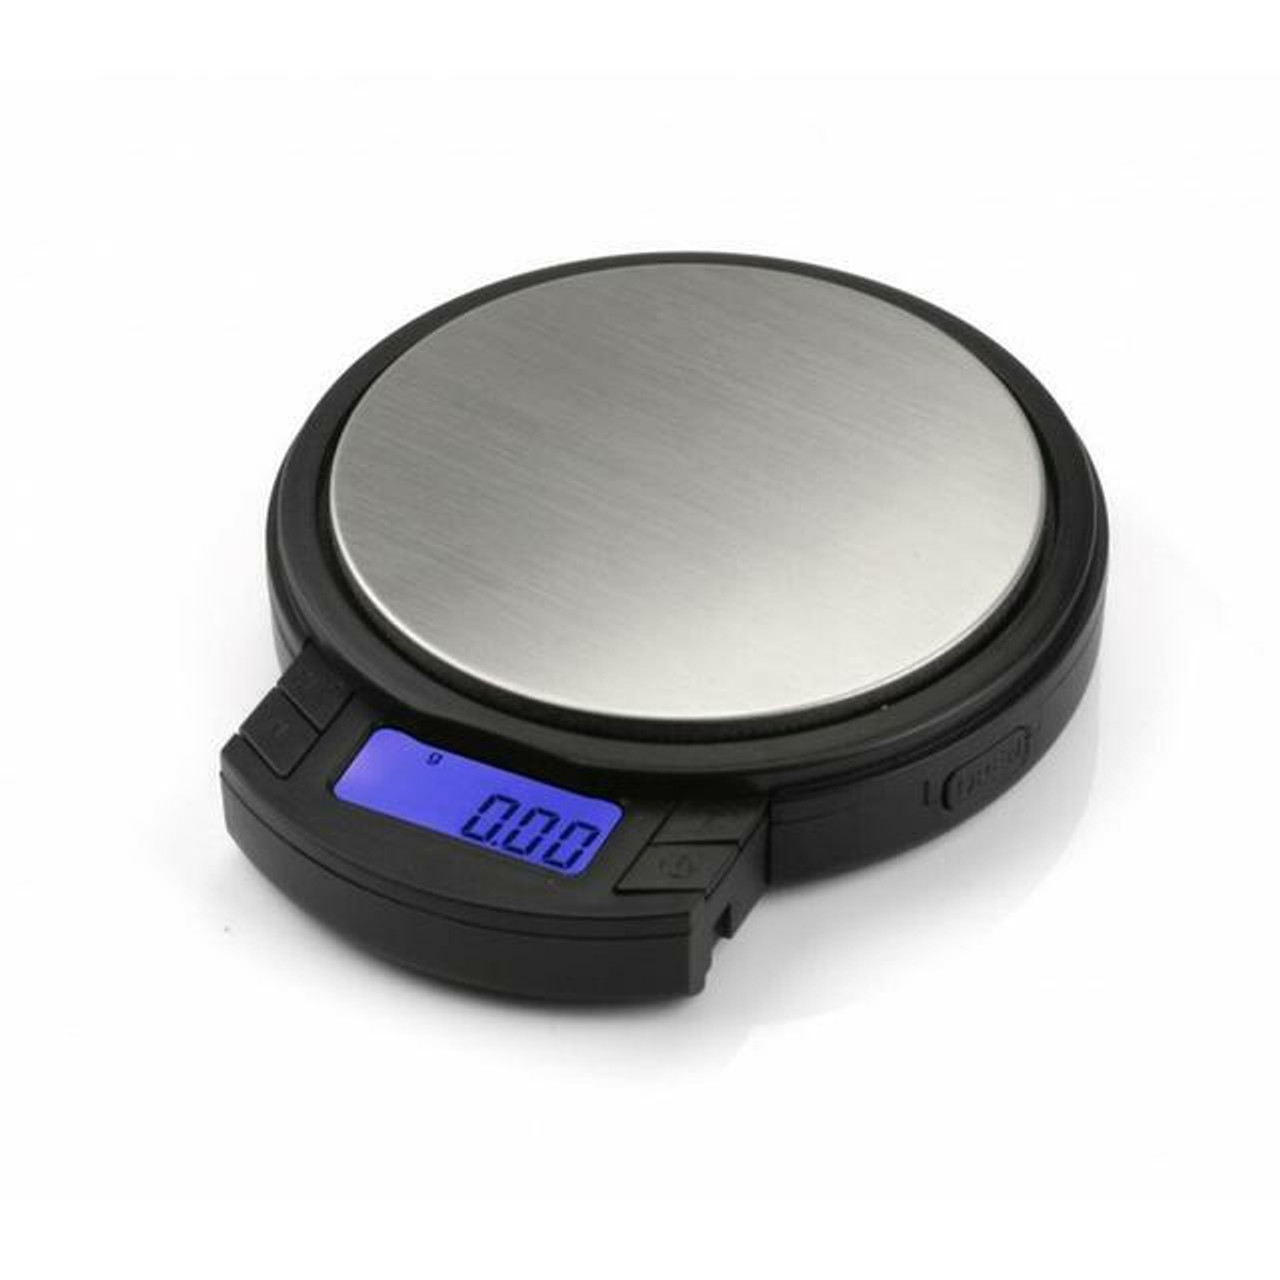 Weigh Gram Scale Digital Pocket Scale,100g by 0.01g,Digital Grams Scale, Food  Scale, Jewelry Scale Black, Kitchen Scale 100g